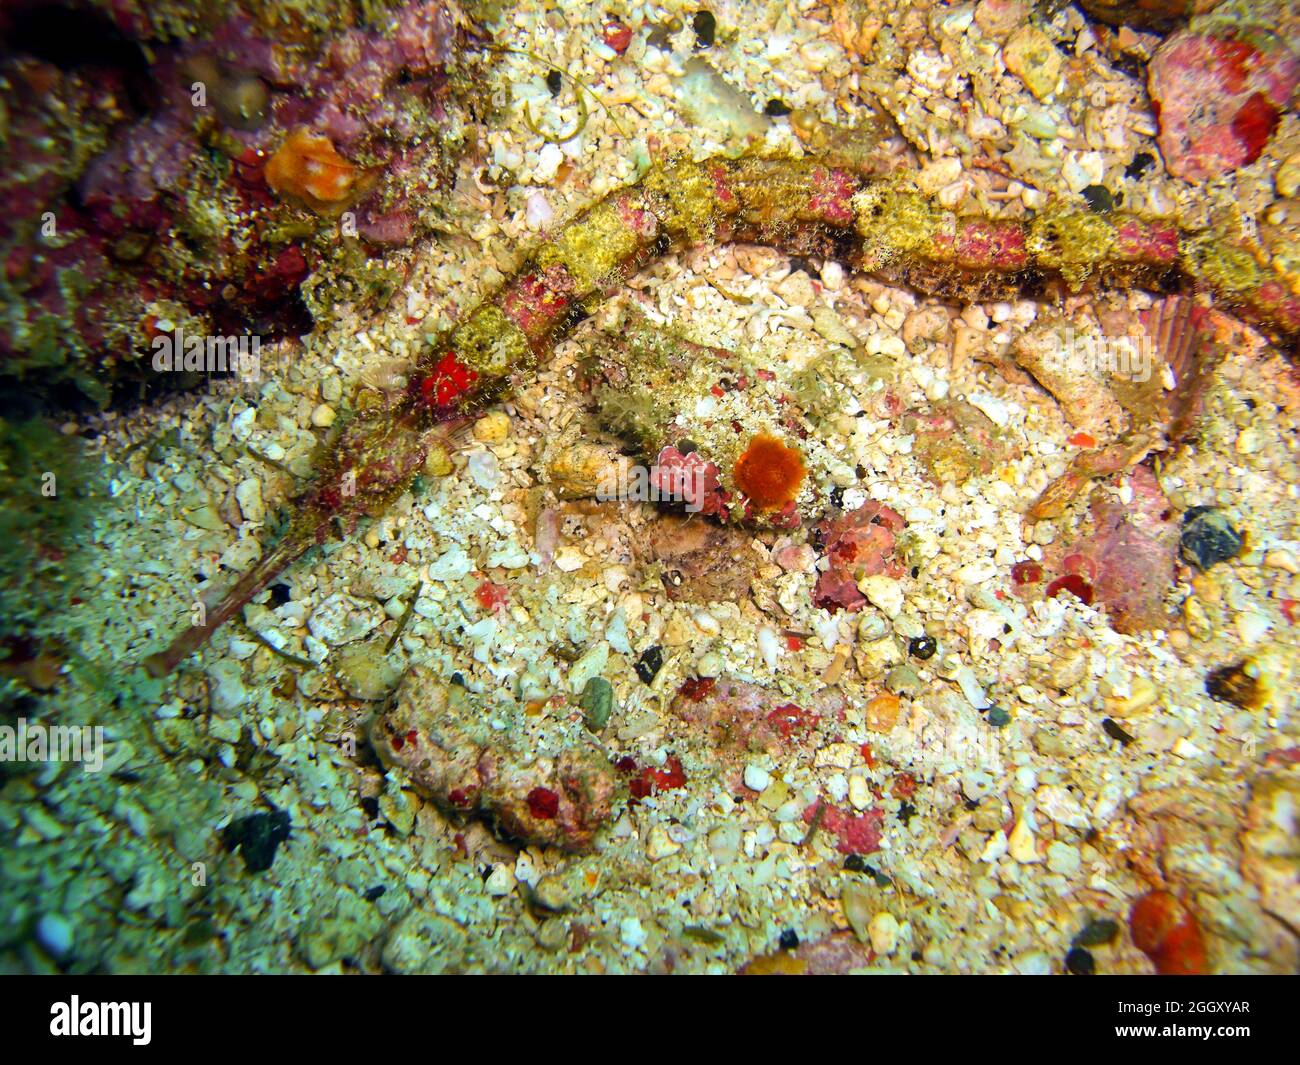 Pipefish on the ground in the filipino sea 5.2.2012 Stock Photo